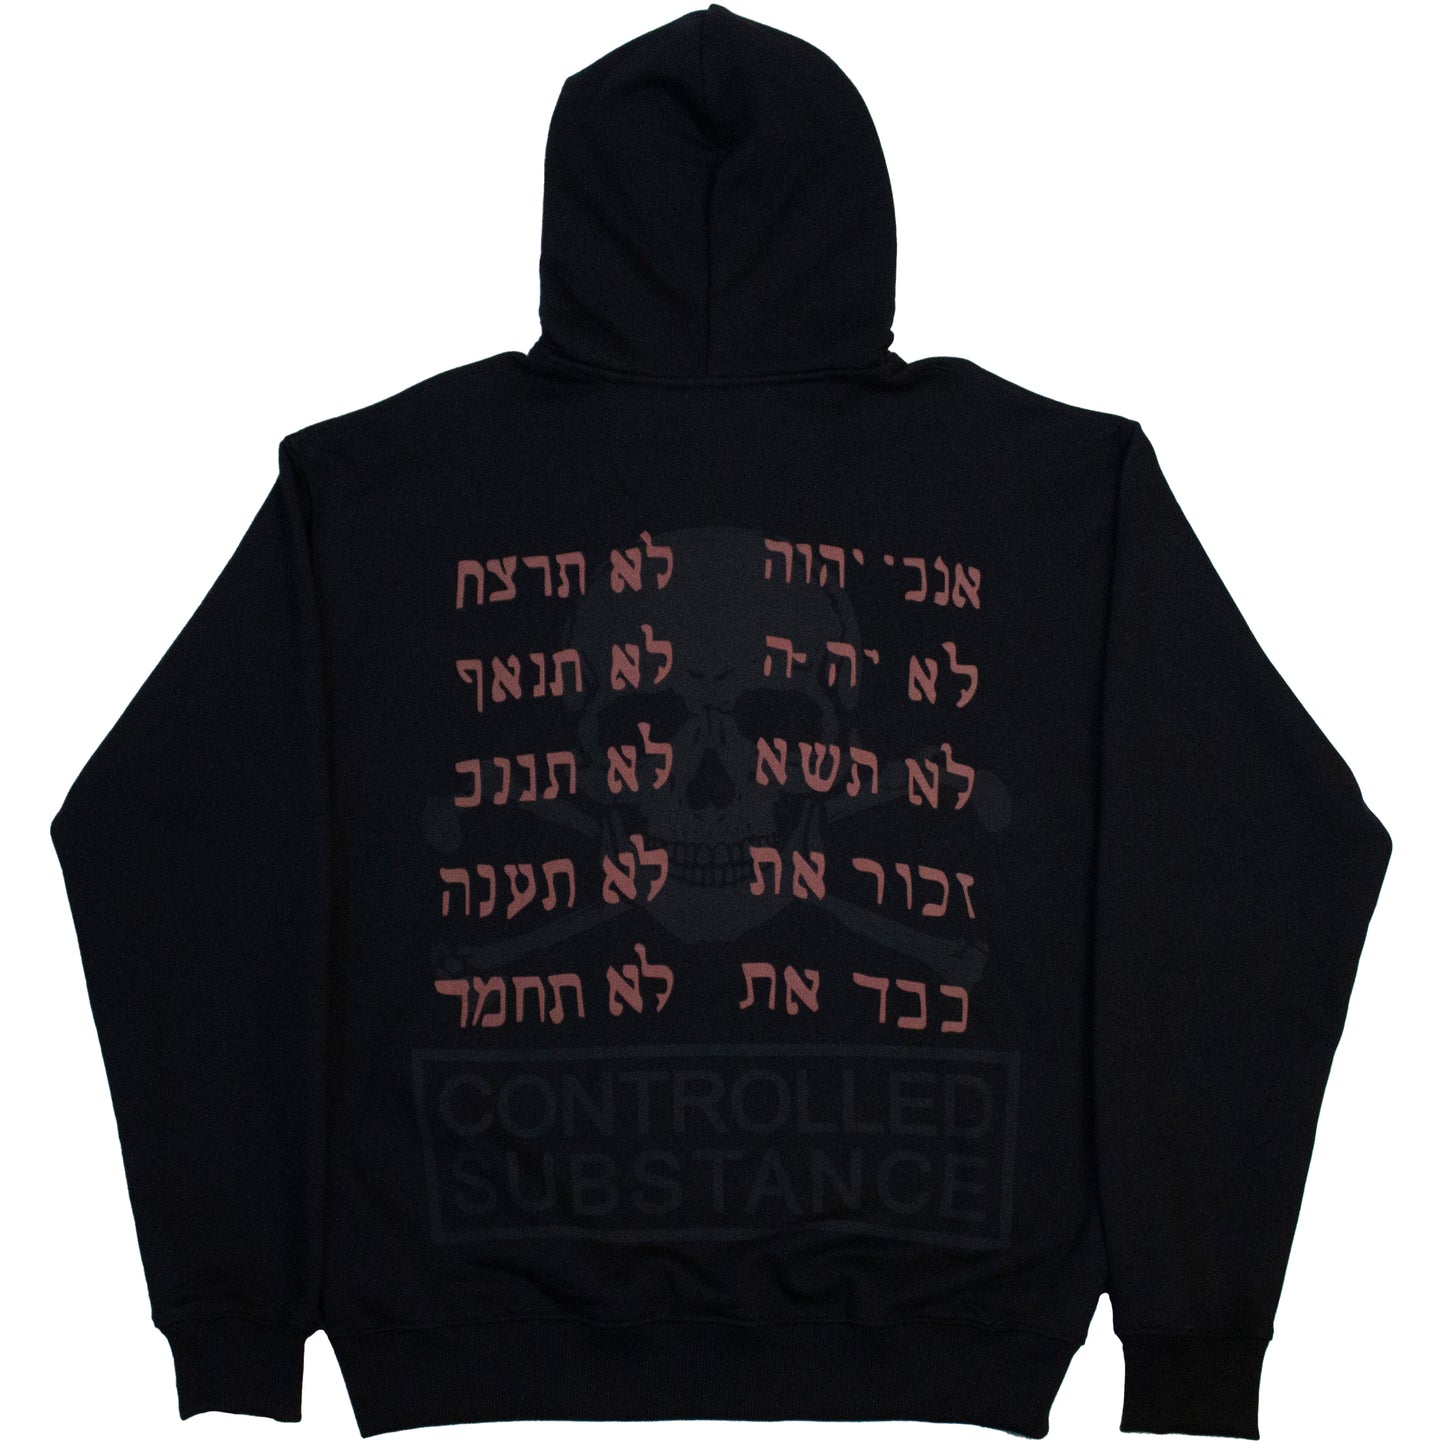 CONTROLLED SUBSTANCE 10 COMMANDMENTS HOODIE